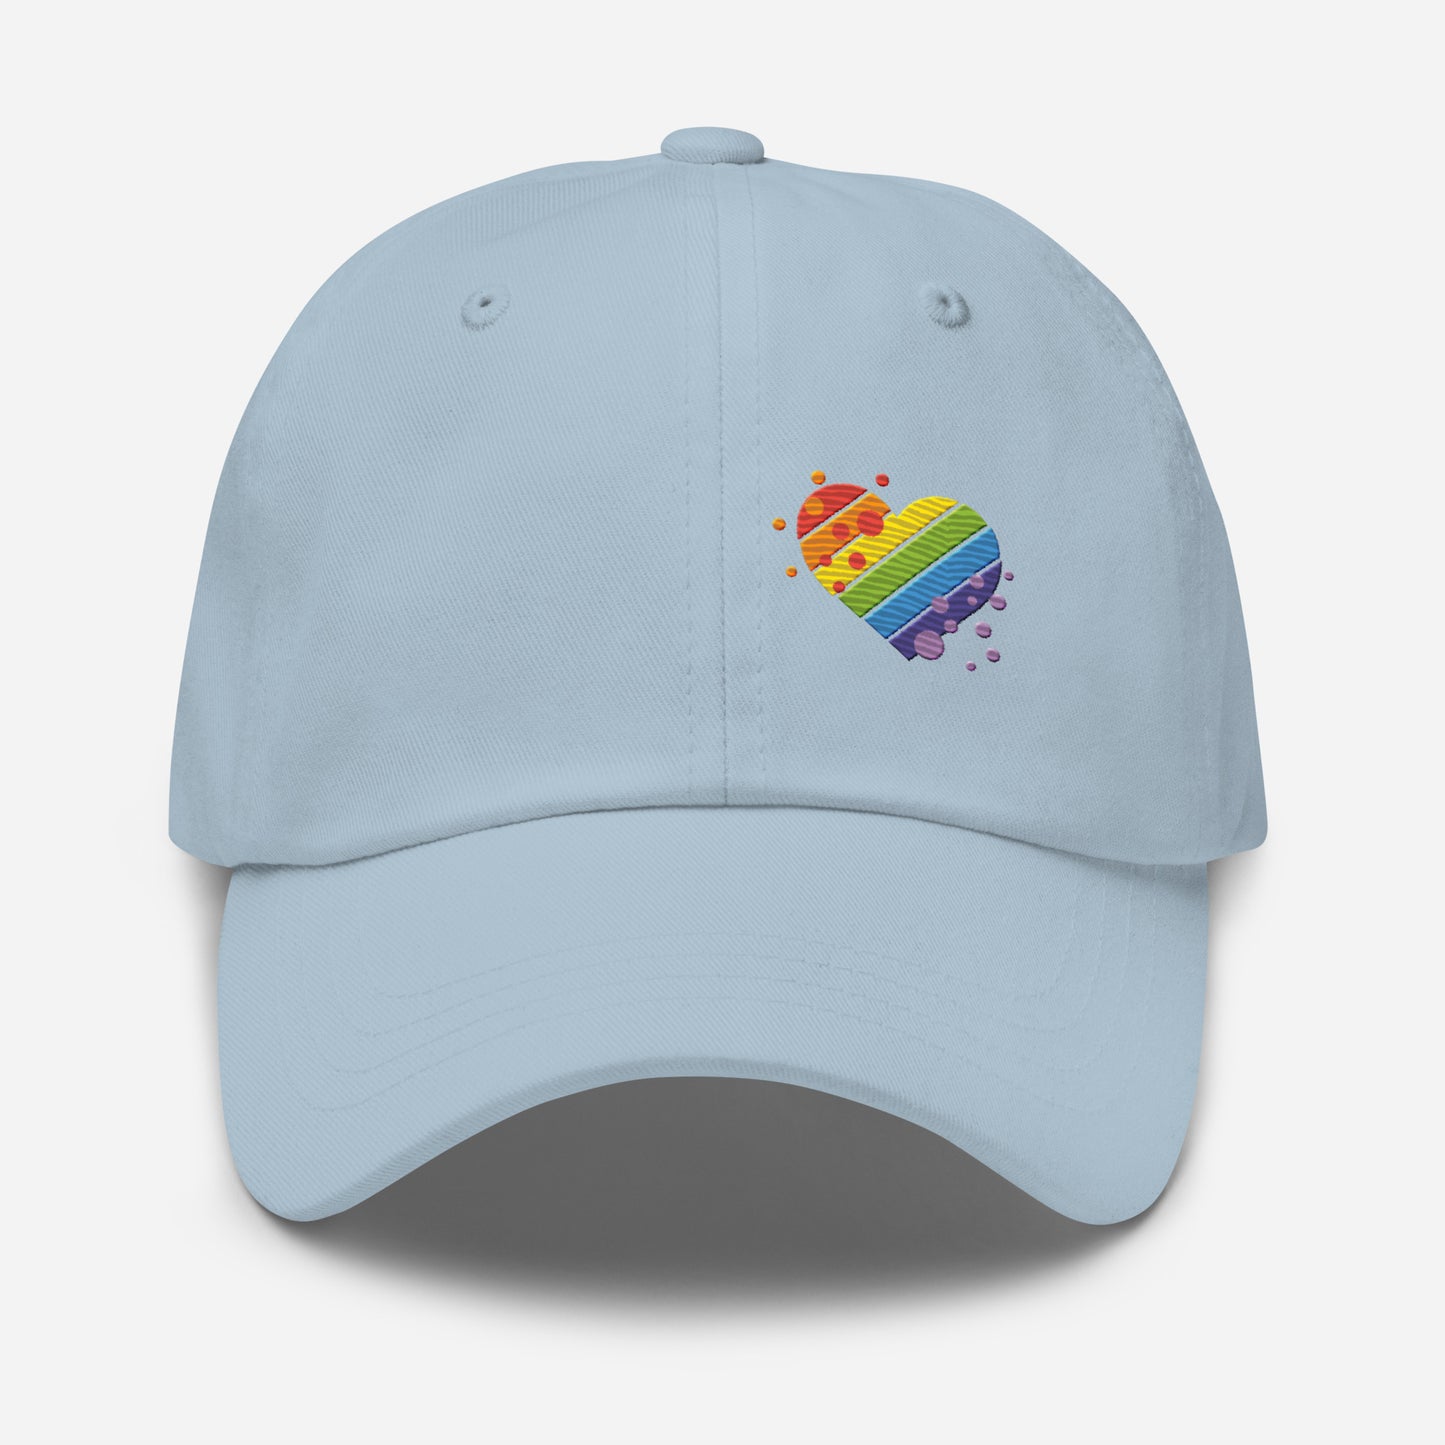 Light blue baseball hat featuring rainbow heart design embroidery with a low profile, adjustable strap.